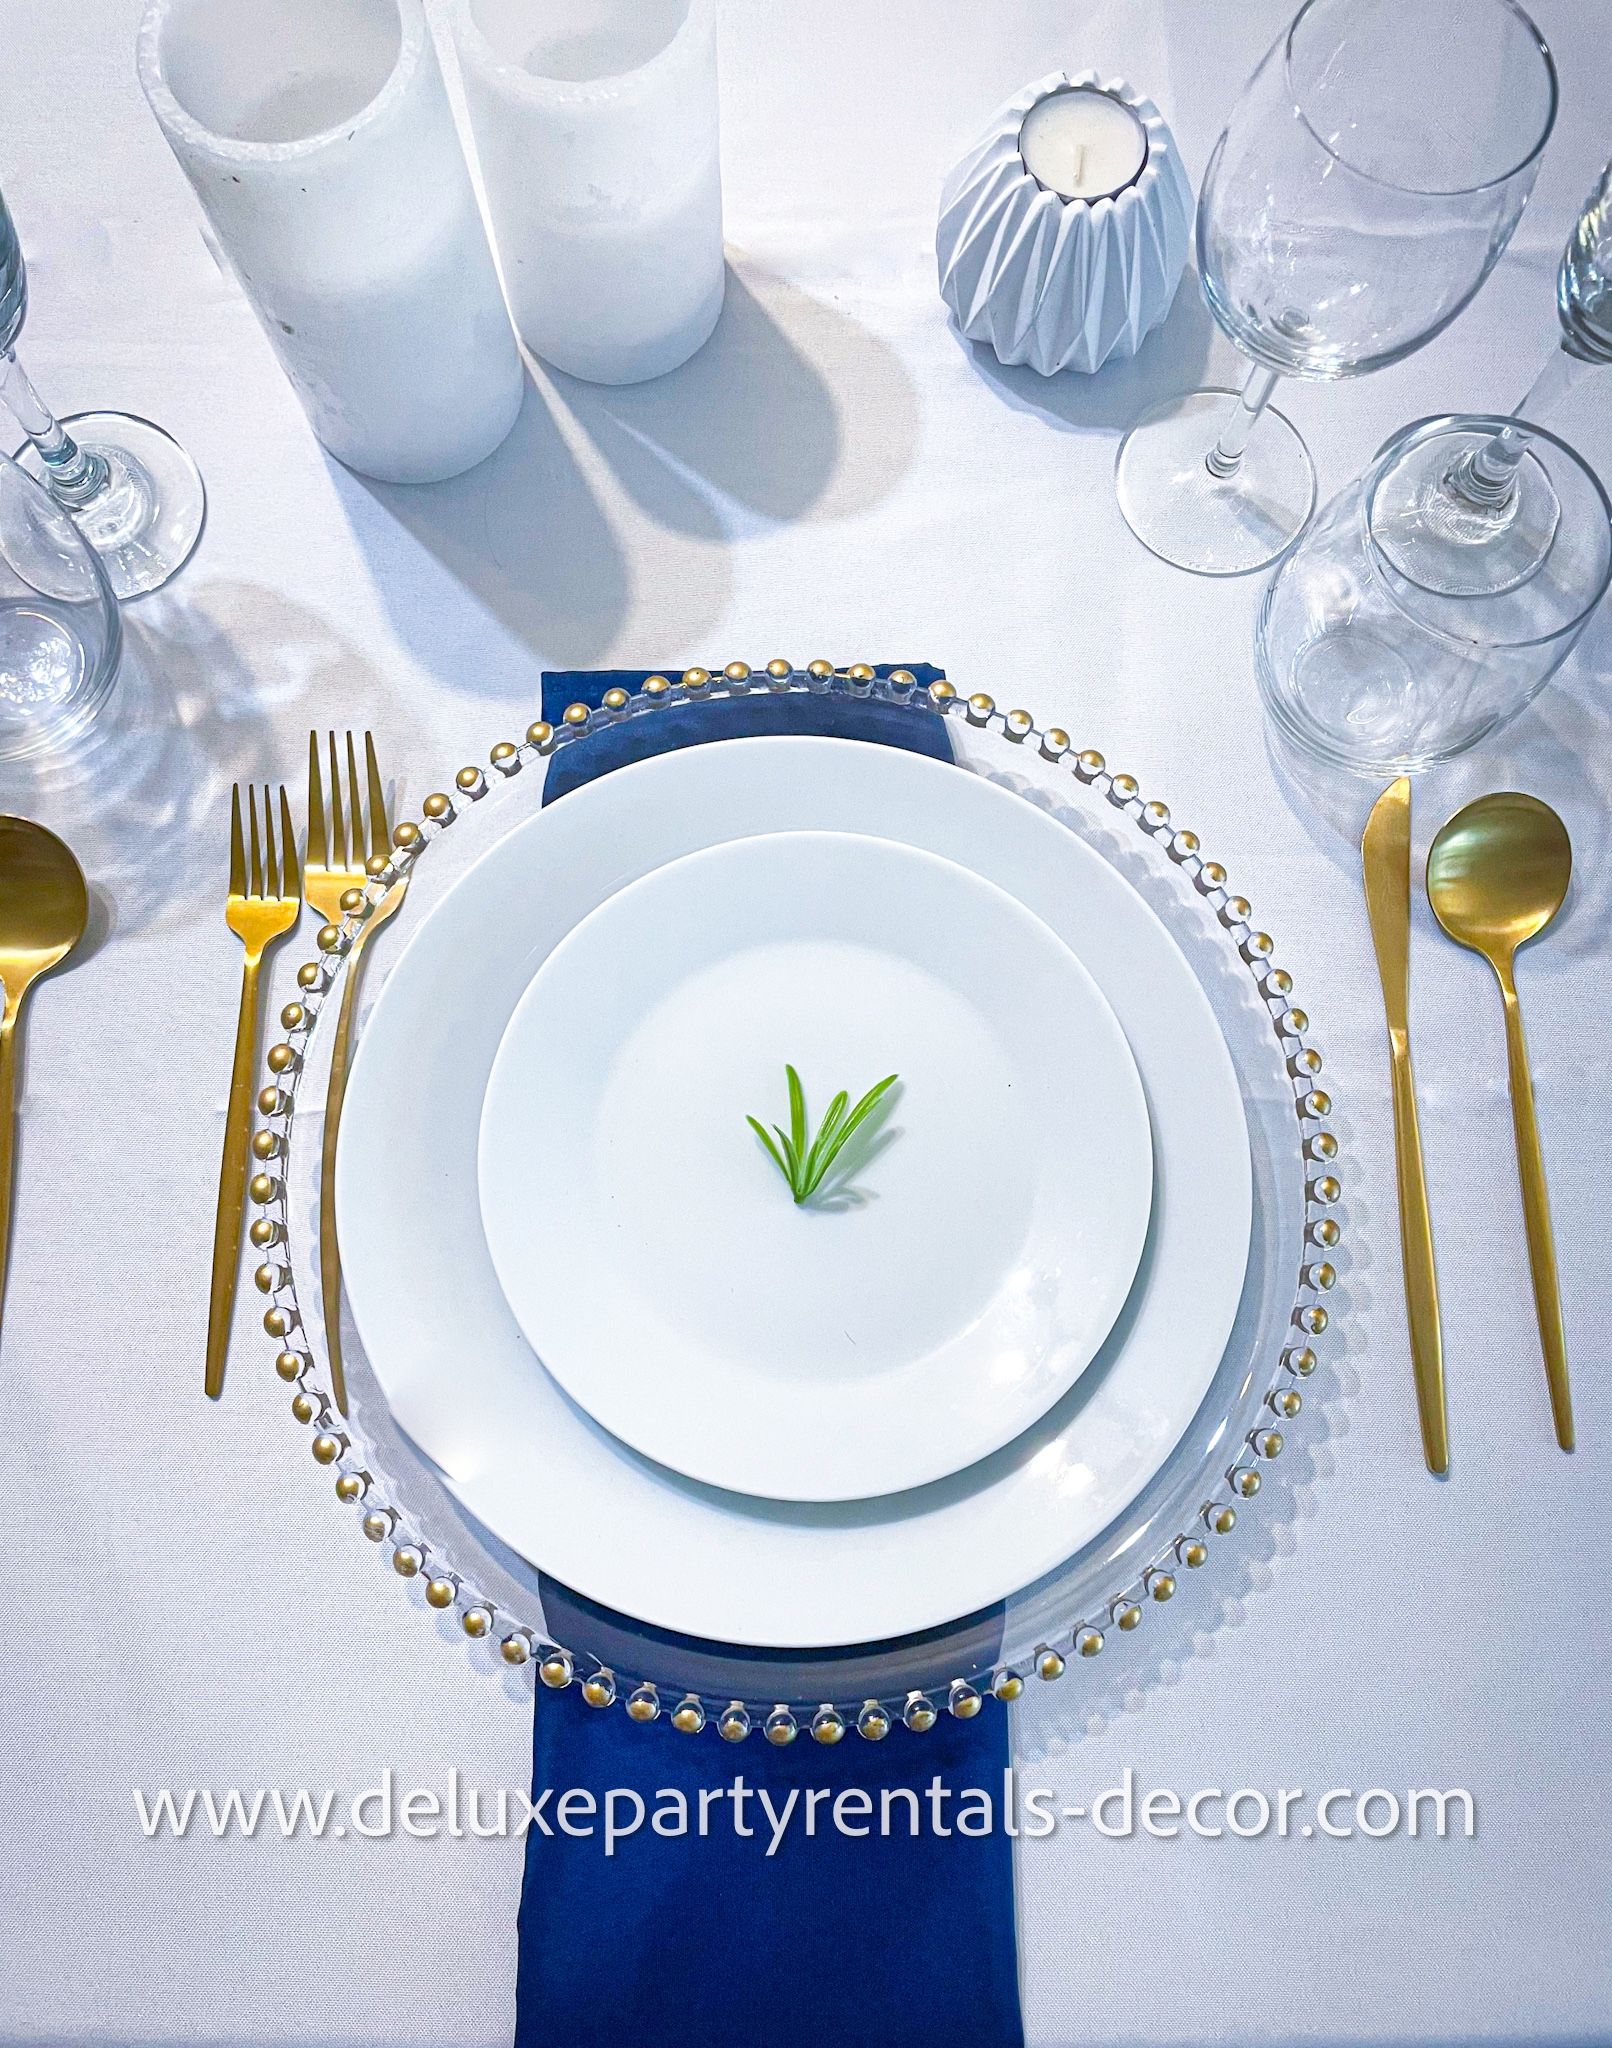 Table / Chairs / Chargers Plate / Dinner & Salad Plate / Glasses / Napkin